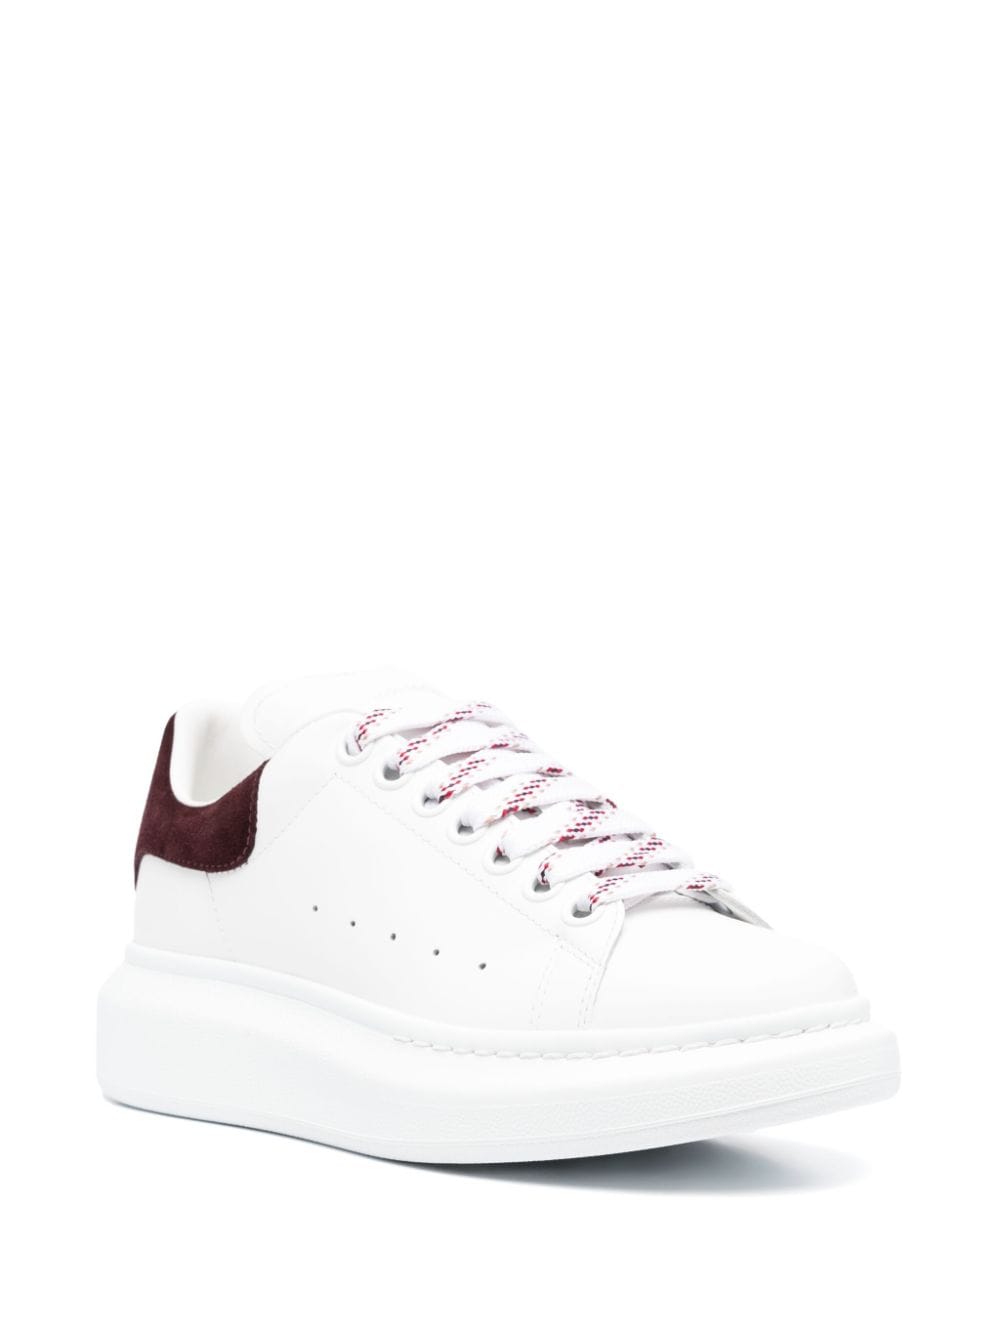 White/burgundy leather/suede oversized low-top sneakers